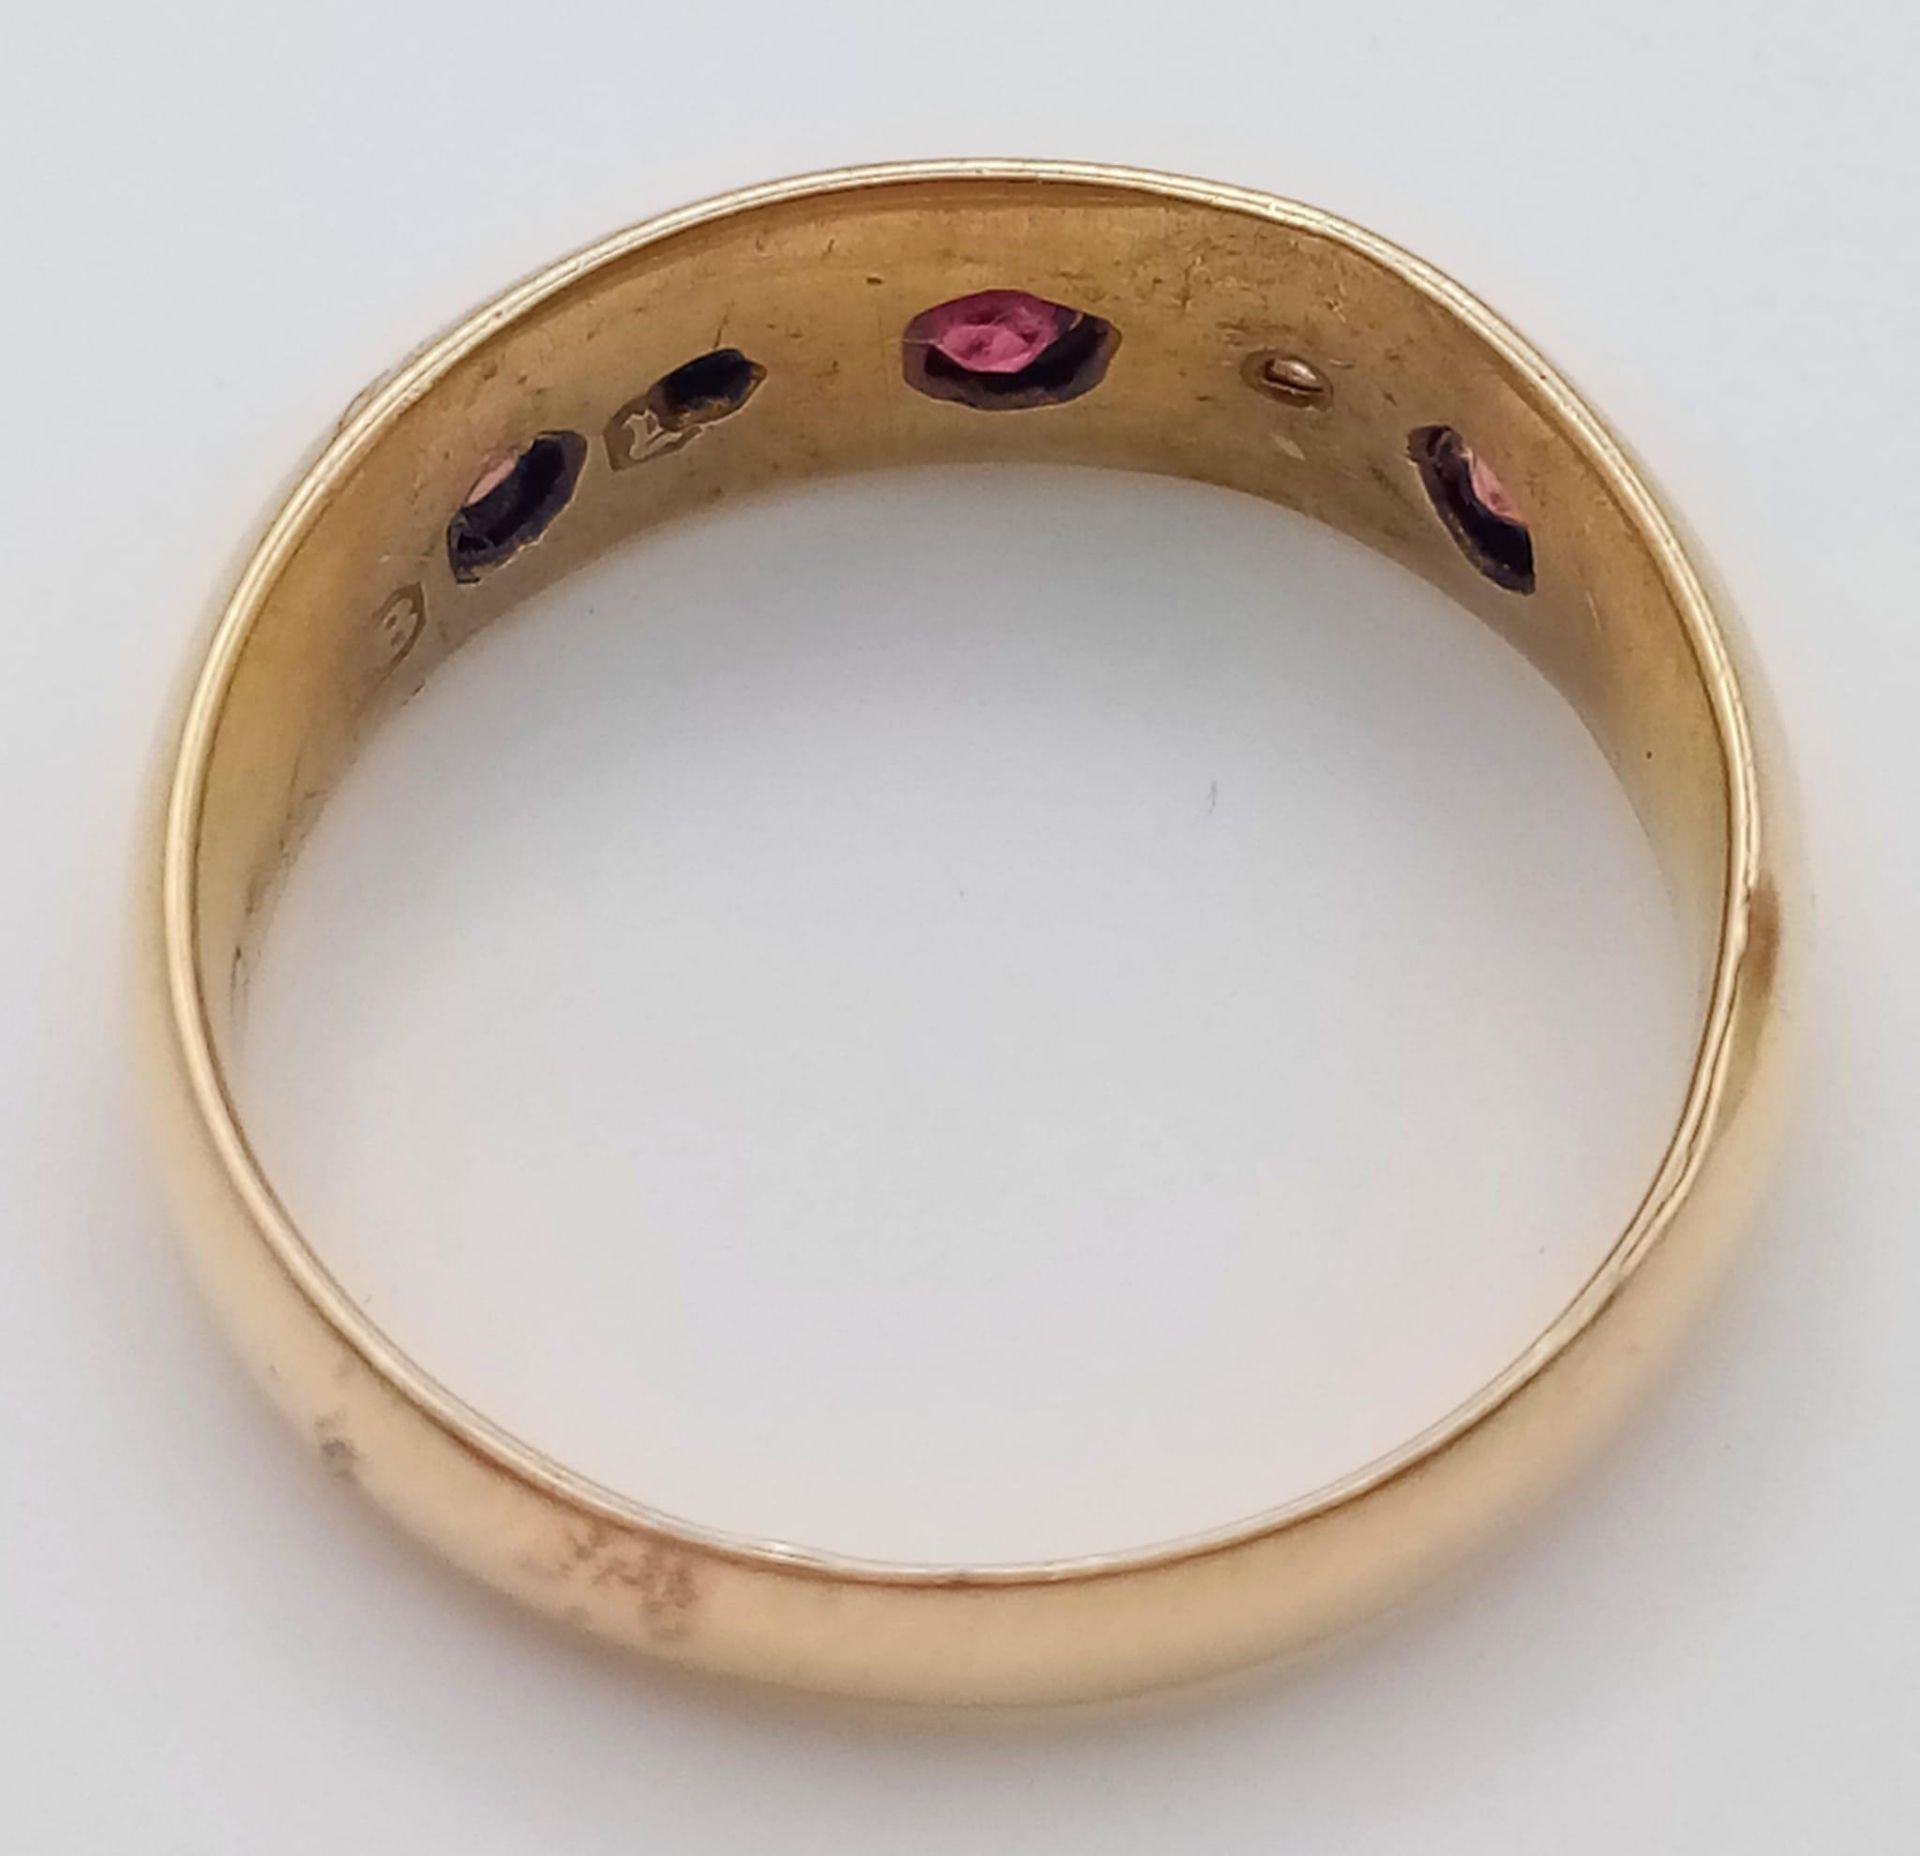 A VINTAGE 18K YELLOW GOLD DIAMOND & RUBY 5 STONE RING (one stone missing). 2.3G. SIZE N. - Image 3 of 4